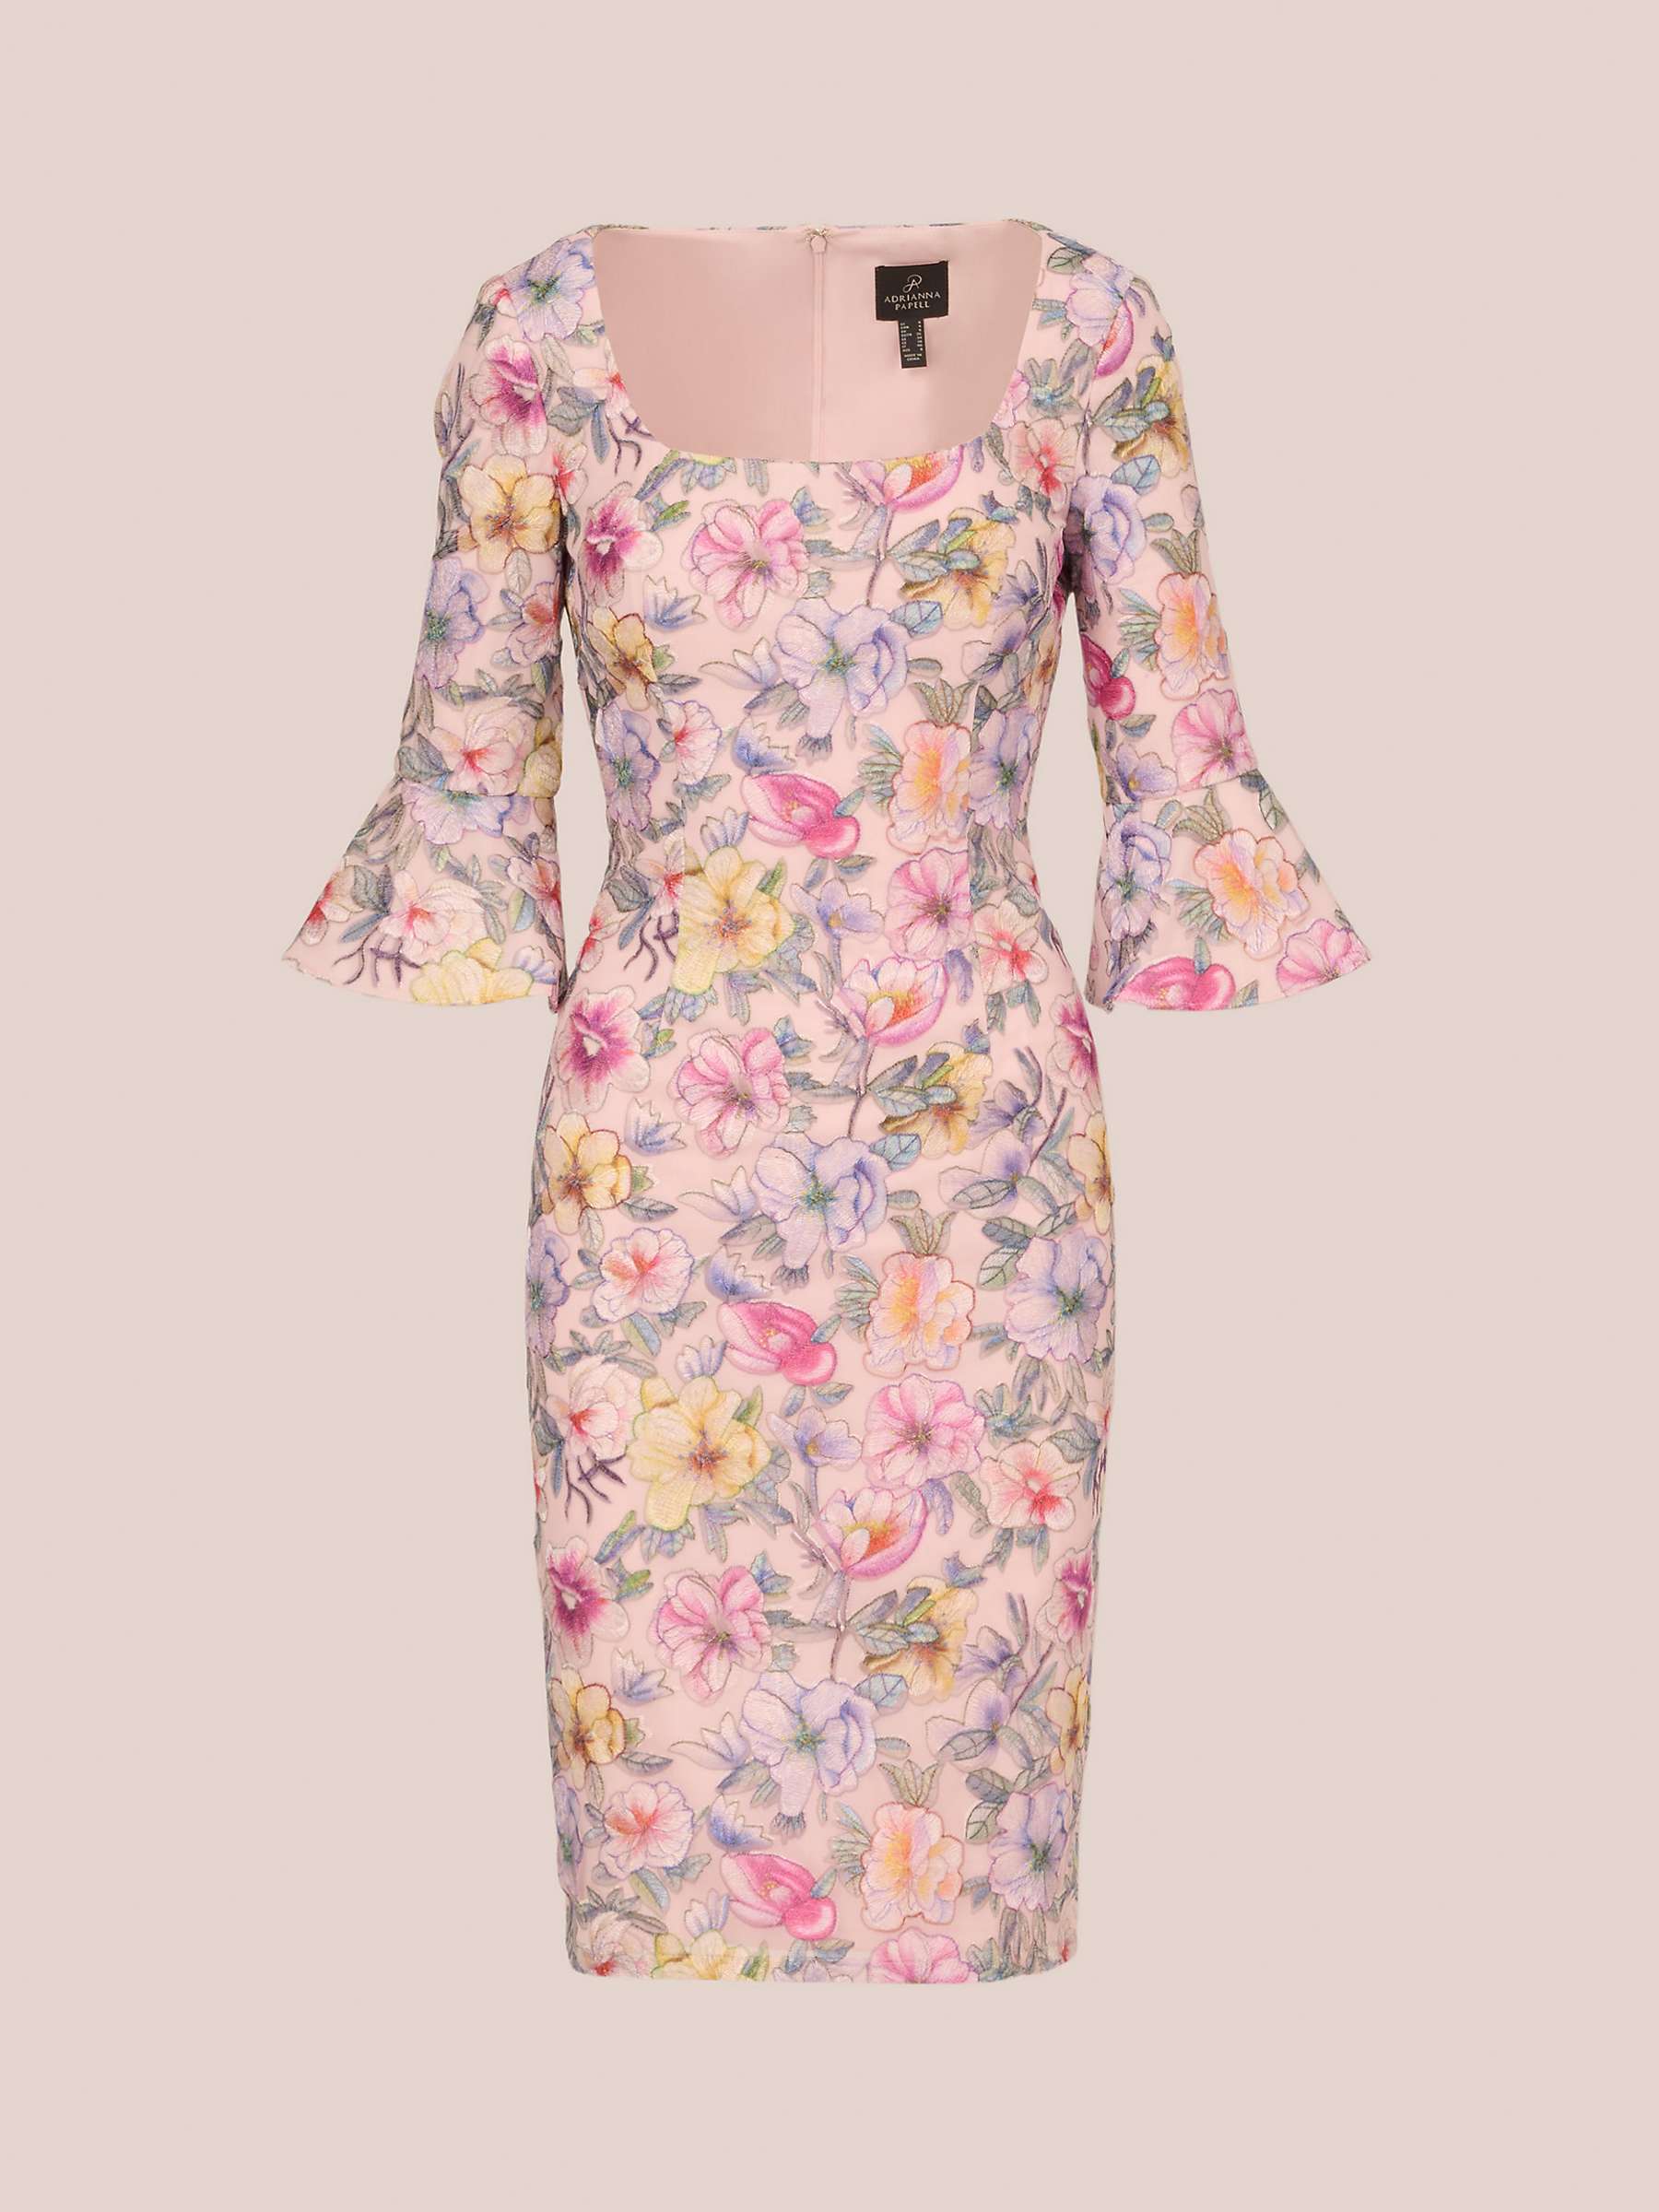 Buy Adrianna Papell Floral Knee Length Dress, Blush/Multi Online at johnlewis.com